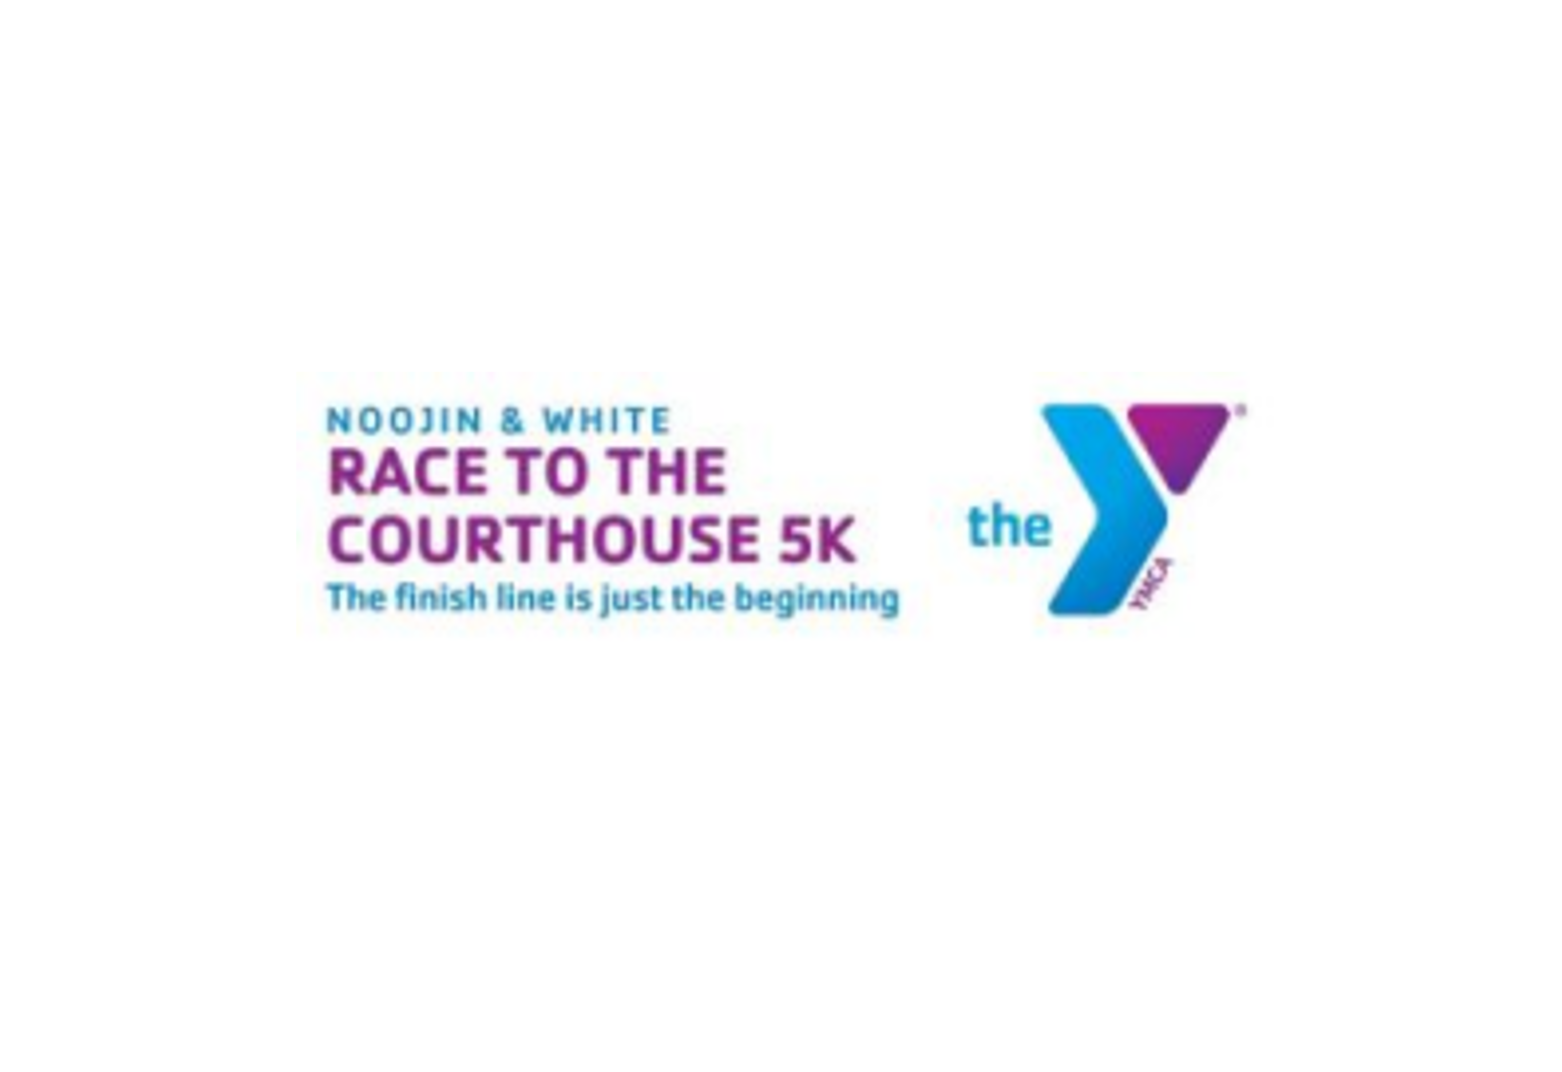 Noojin & White Race to the Courthouse 5K Birmingham Track Club